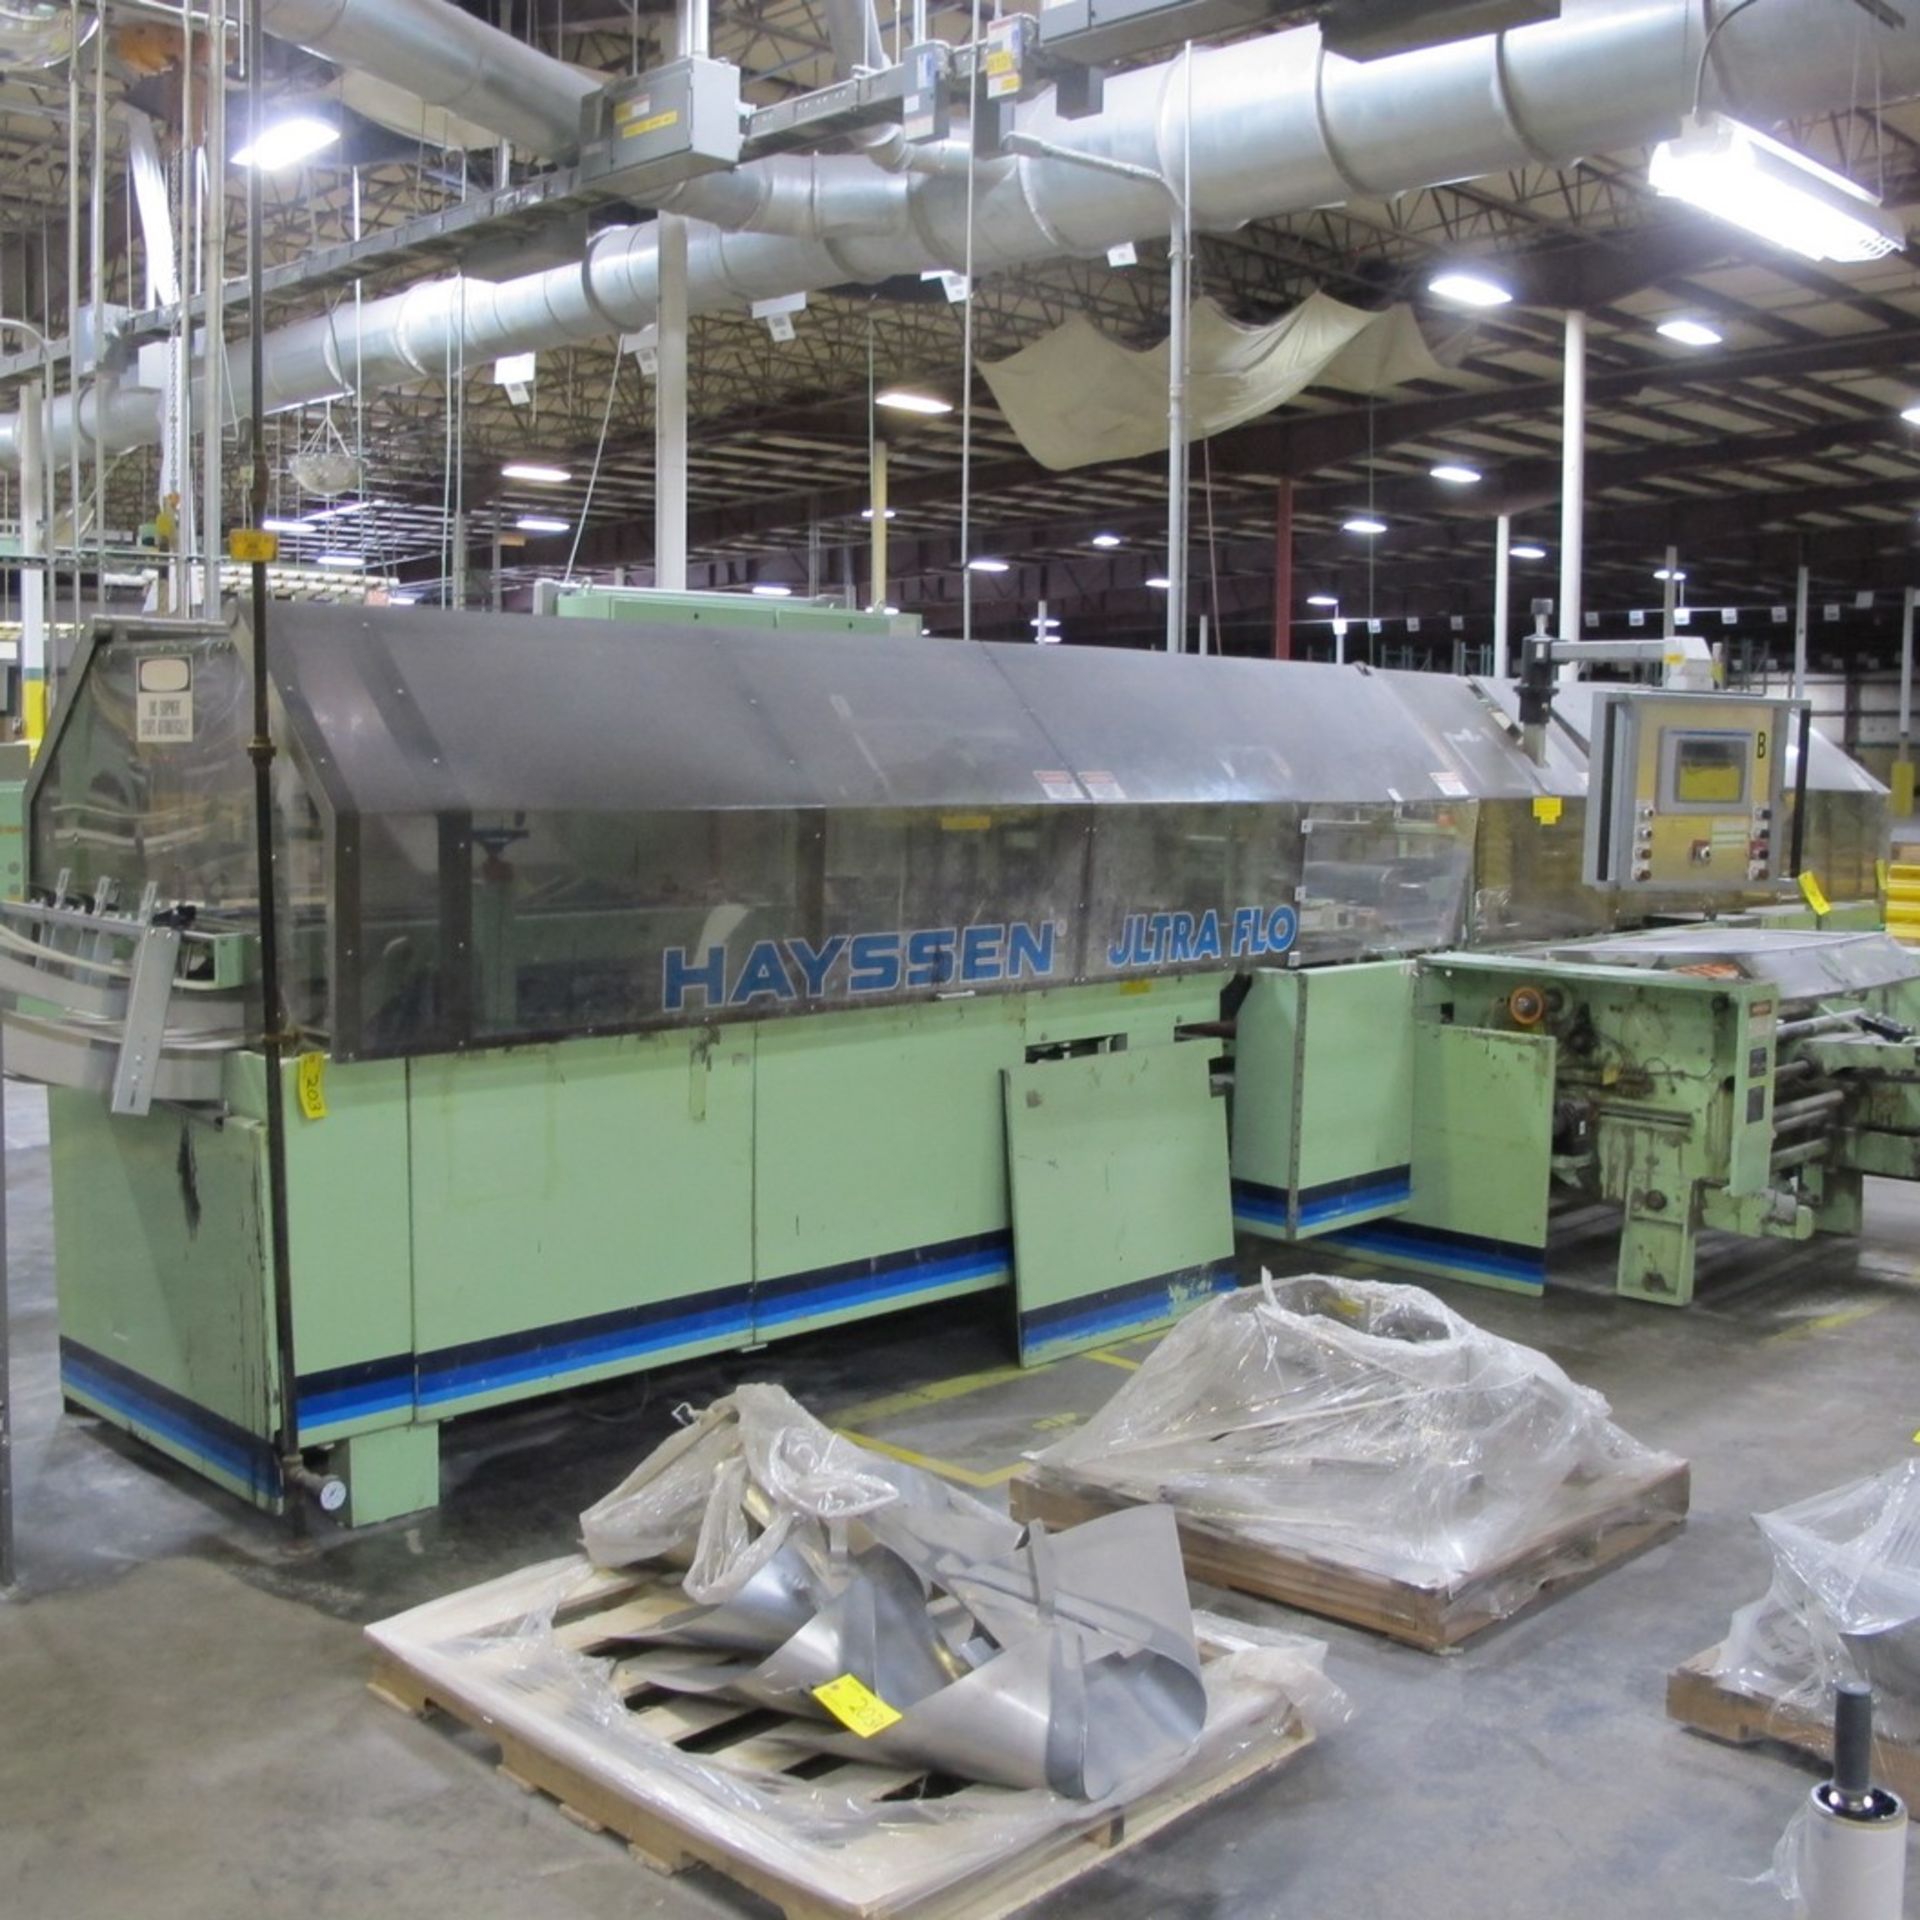 HAYSSEN UF160 LEFT HAND WRAPPER, 1 – 3 INFEED LANES, (1) LAYER, SINGLE LEVEL, POLY WRAPPING